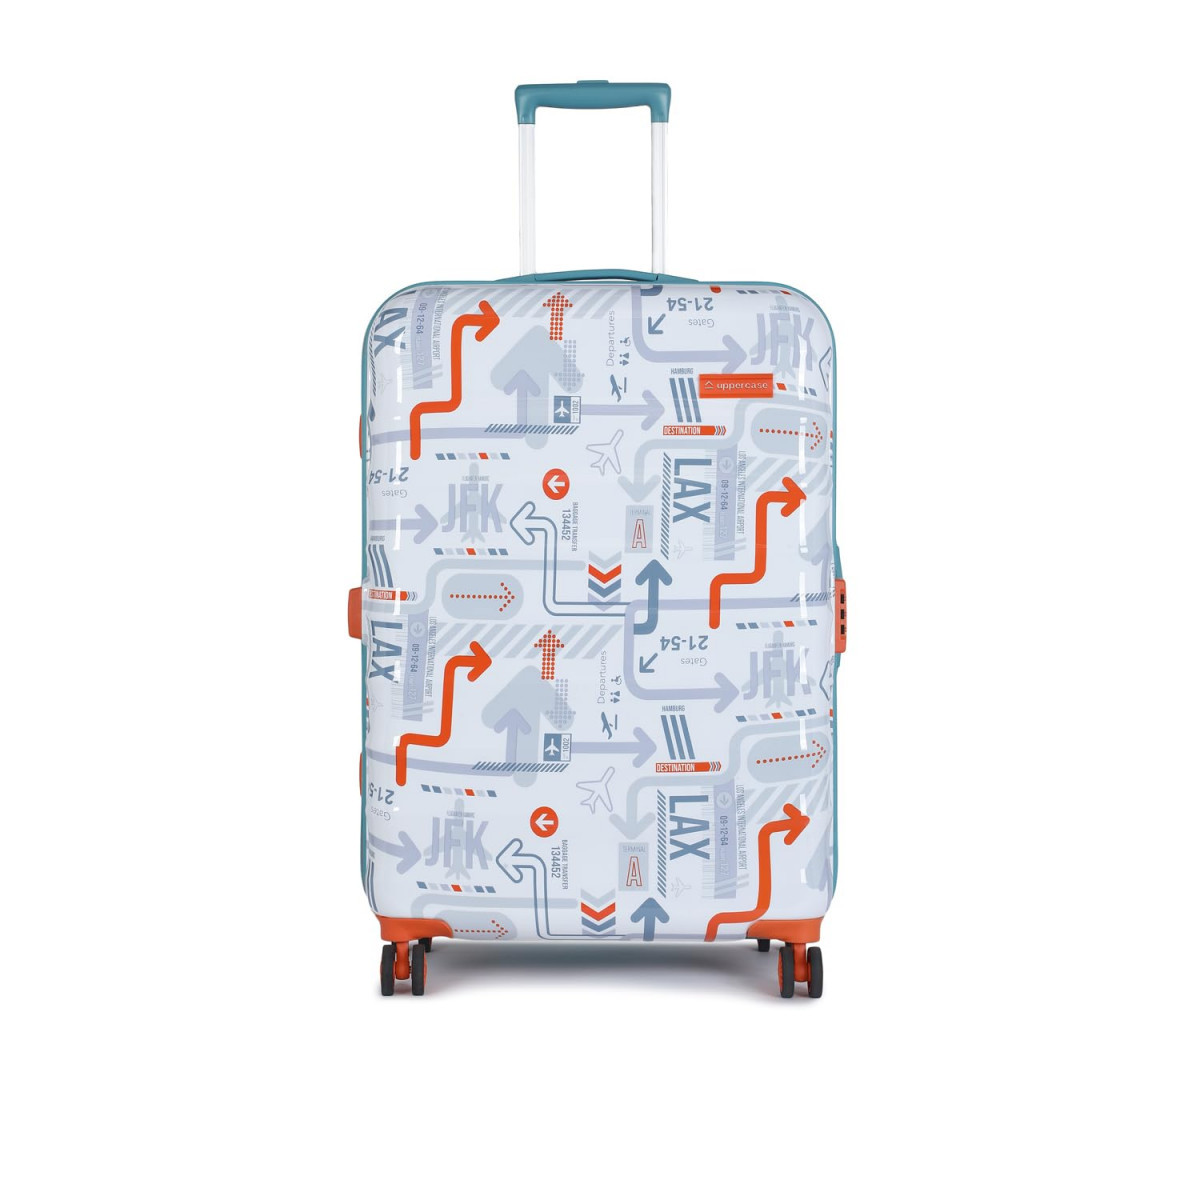 uppercase Jfk Duo Trolley Bag Set Of 3 SML Hardsided Cabin  Check-In Luggage Combination Lock 8 Wheel 2000 Days Warranty Dual Tone White  Teal Blue 31 X 53 X 755 Cm Polyester Spinner